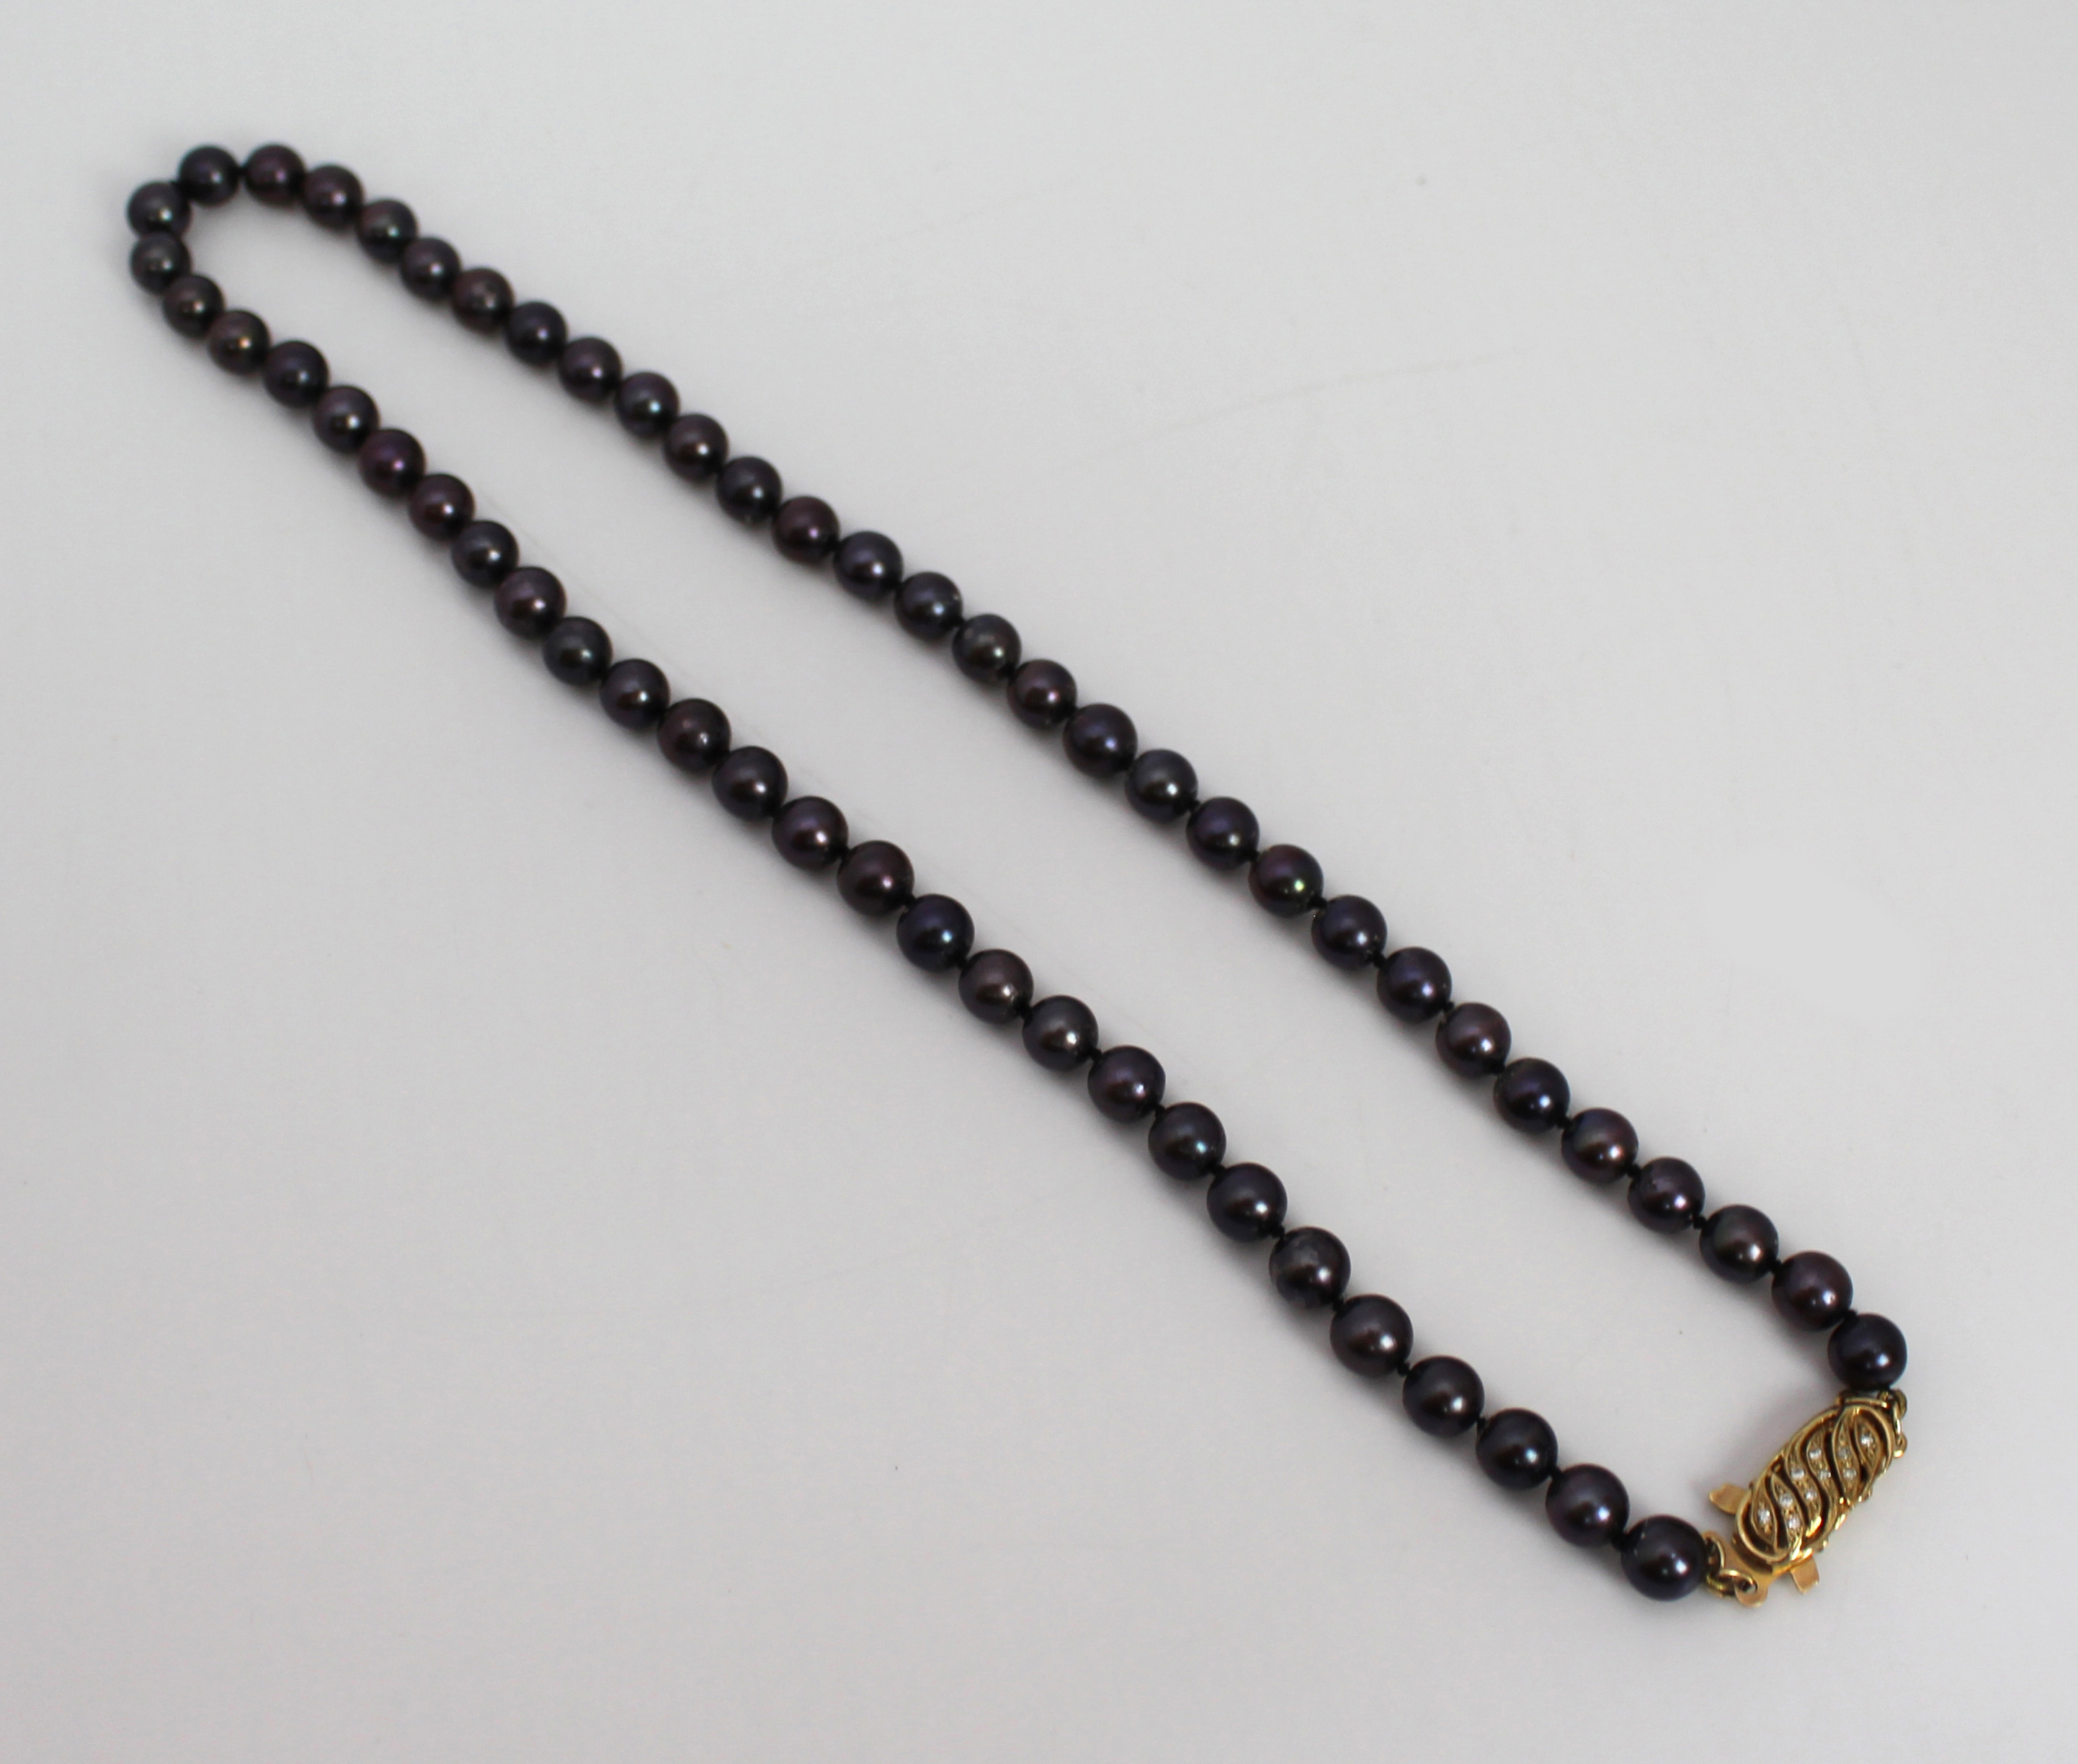 Black Pearl Necklace - Image 5 of 6